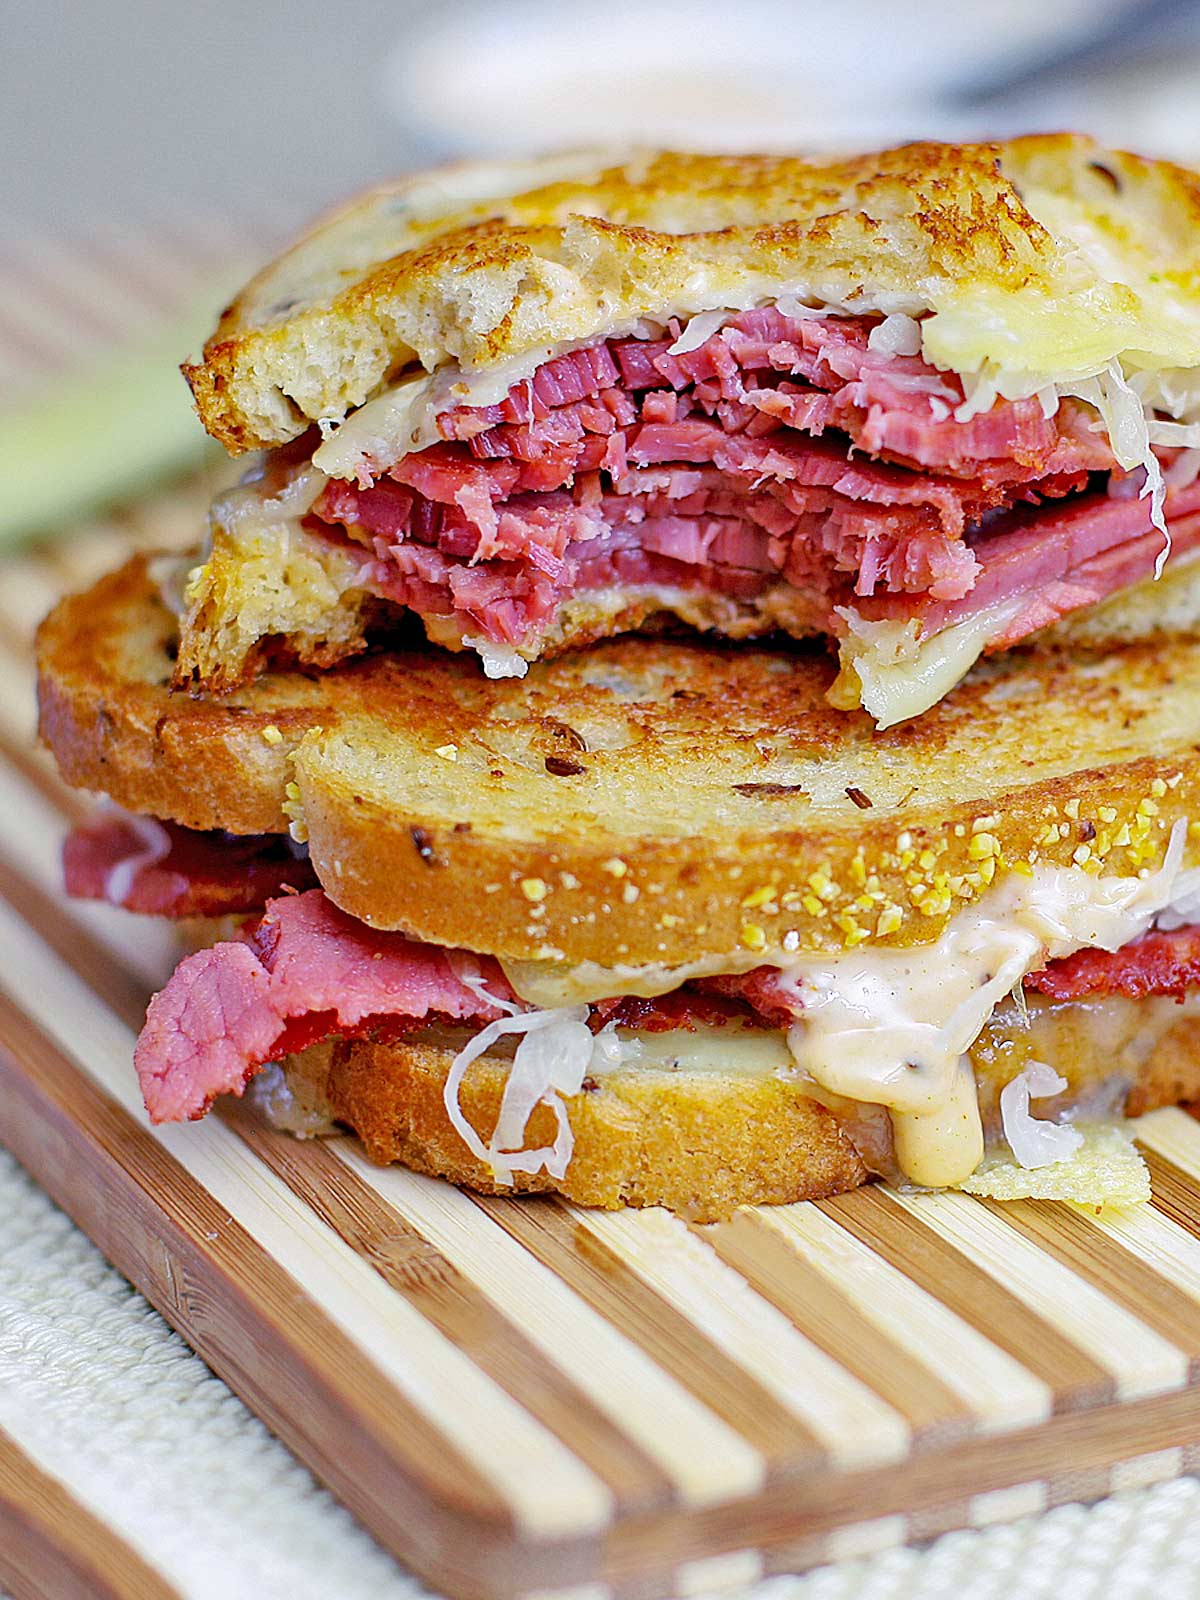 Corned beef sandwich cut in half with sauce and cheese oozing out.